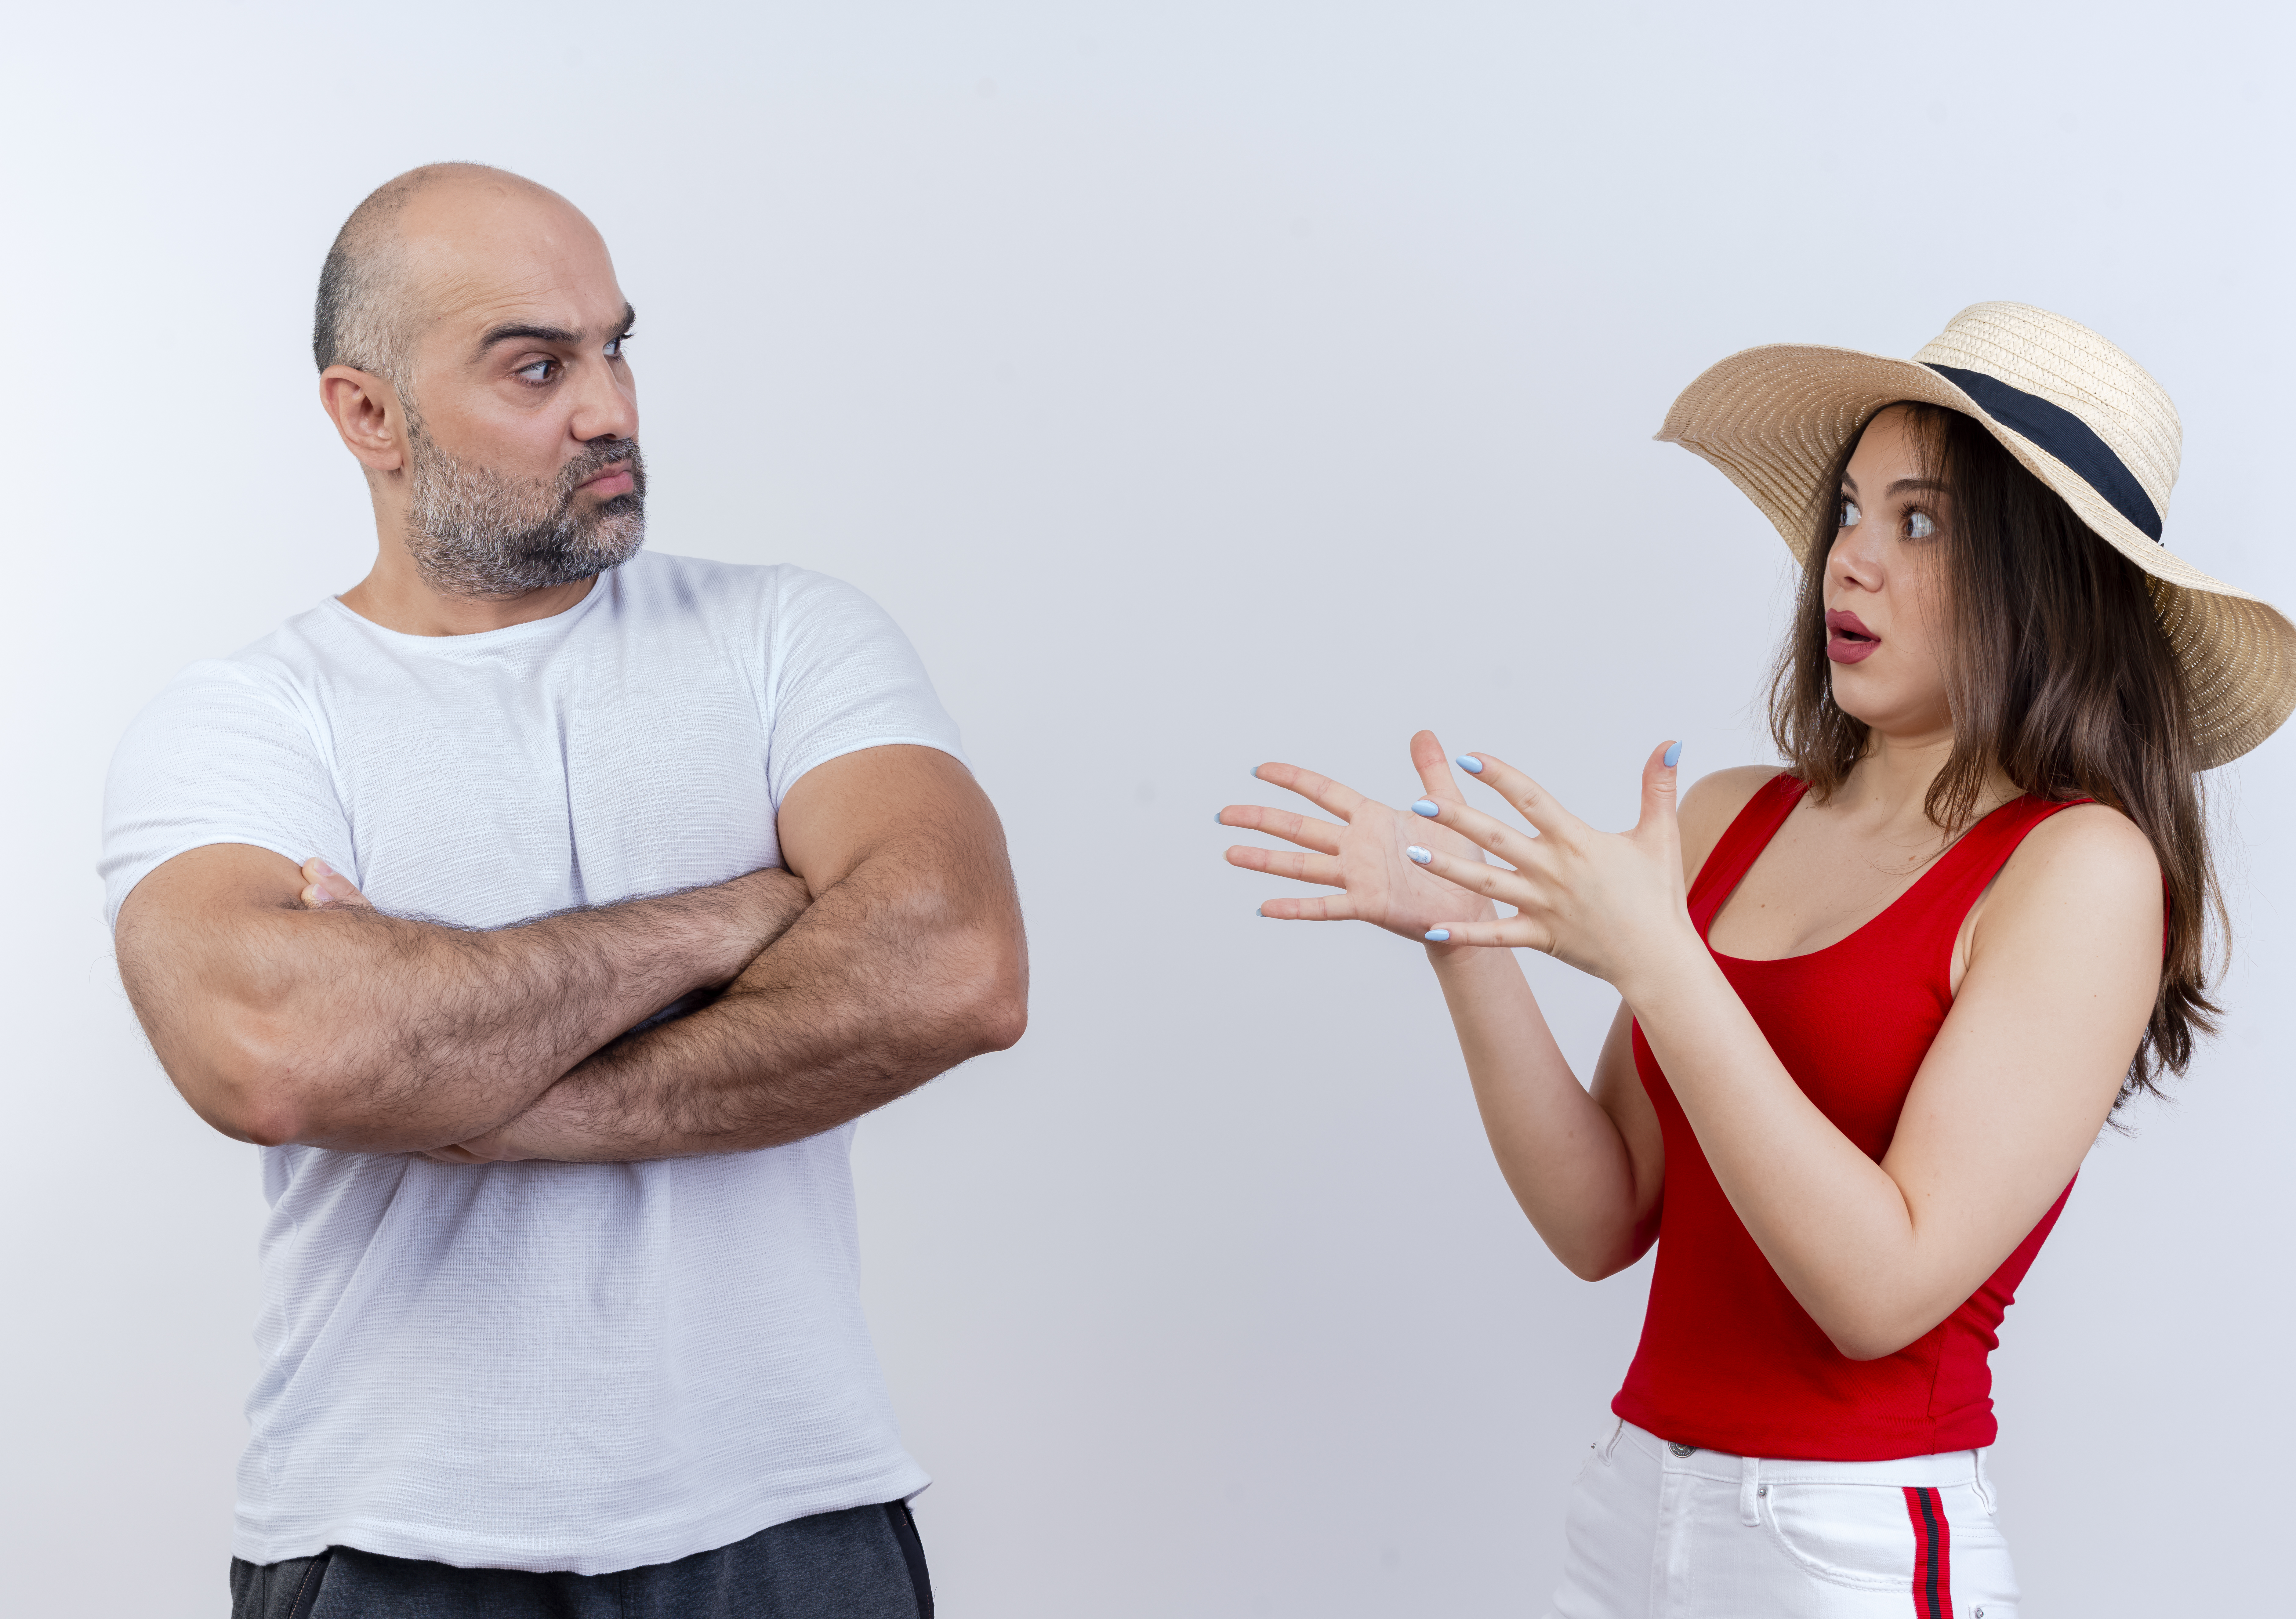 Man showing disapproval to a woman wearing a red top and a hat | Source: Freepik